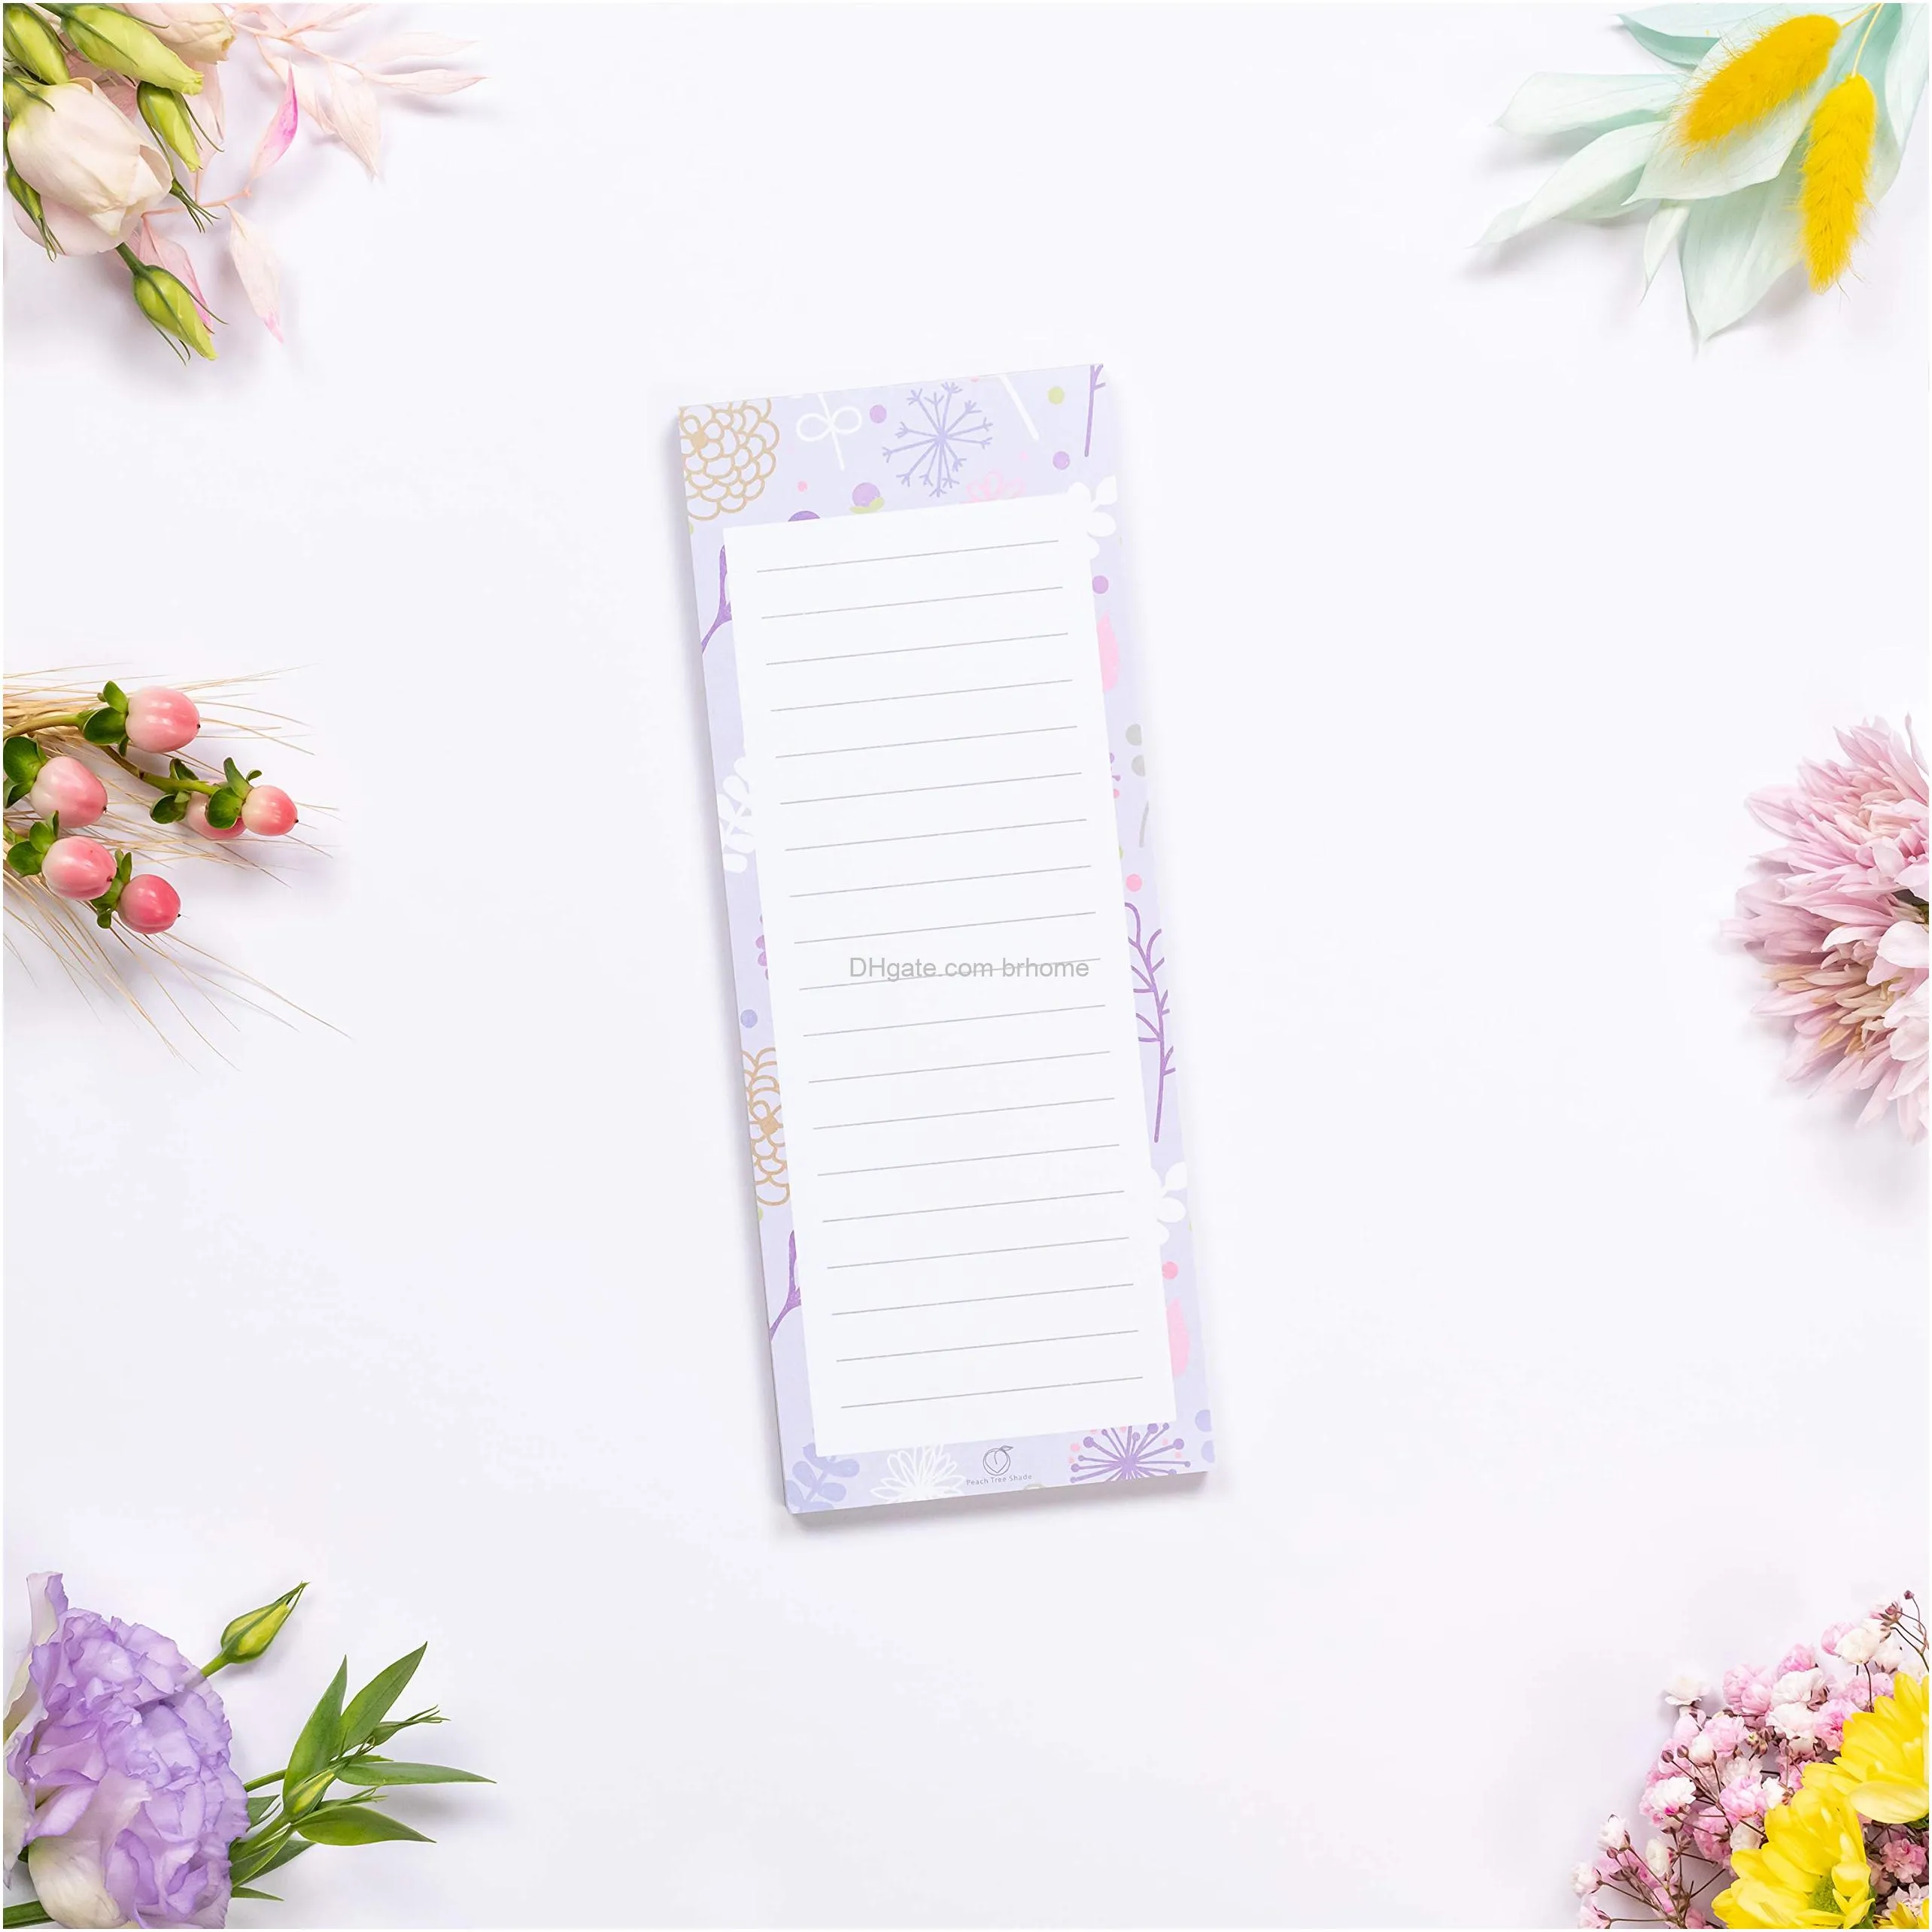 magnetic notepads 60 sheets per pad 3.5 x 9 flower patterns for fridge kitchen shopping grocery todo list memo reminder book party stationery floralnotes